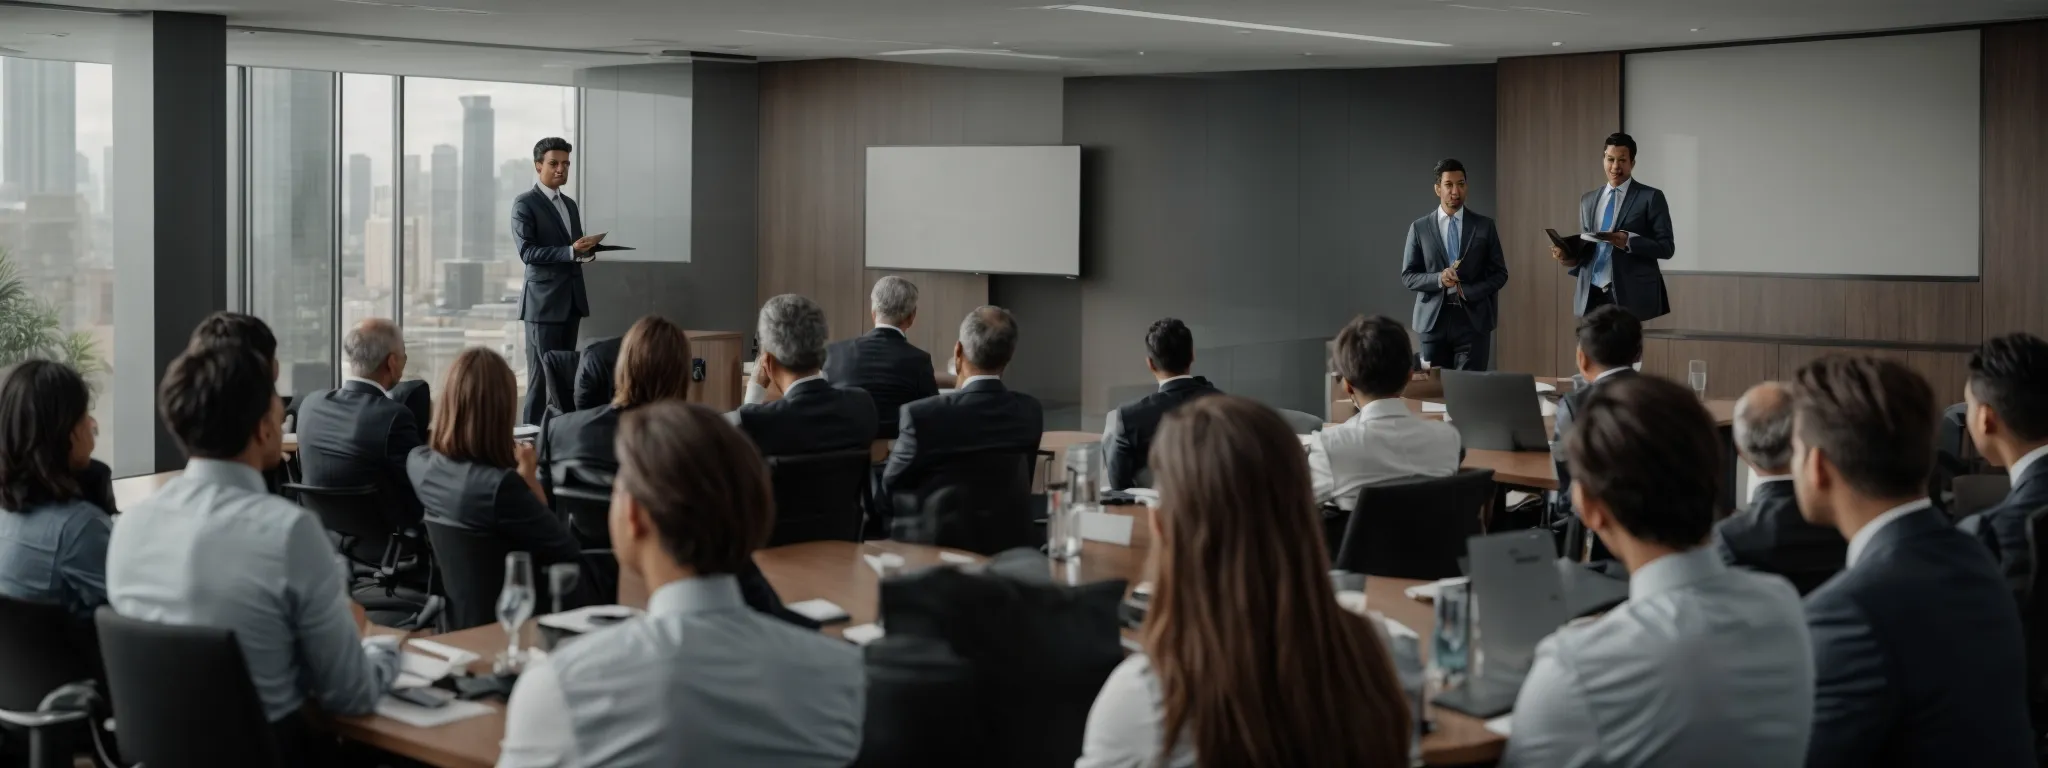 a professional giving a presentation to a group of focused executives in a modern conference room.